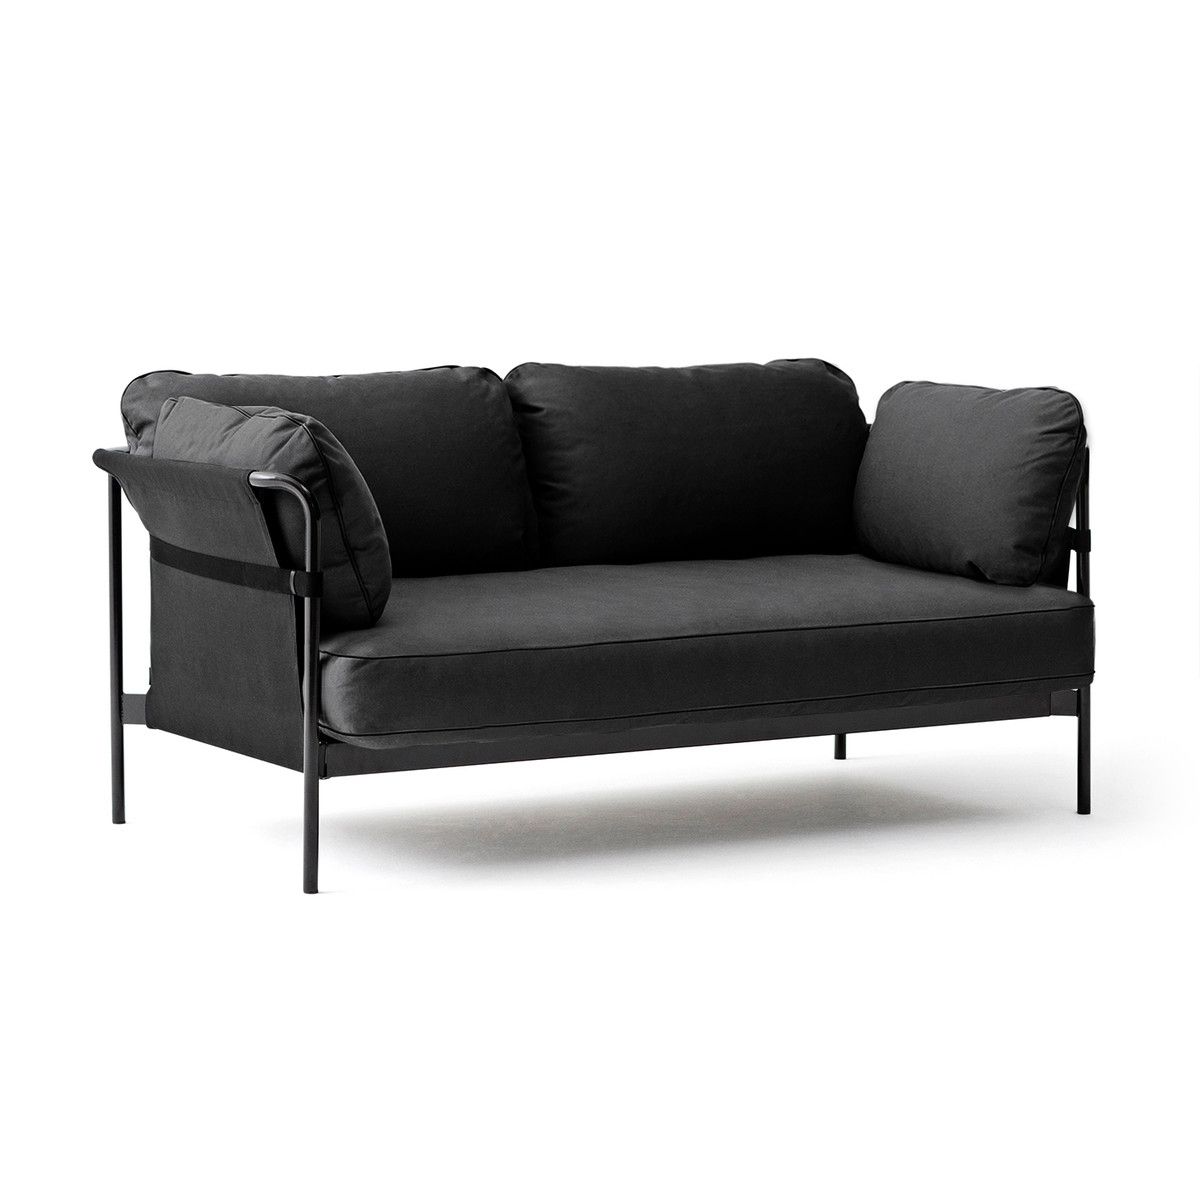 Best And Newest Black 2 Seater Sofas For Can 2 Seater Sofahay In Our Interior Design Shop (View 7 of 15)